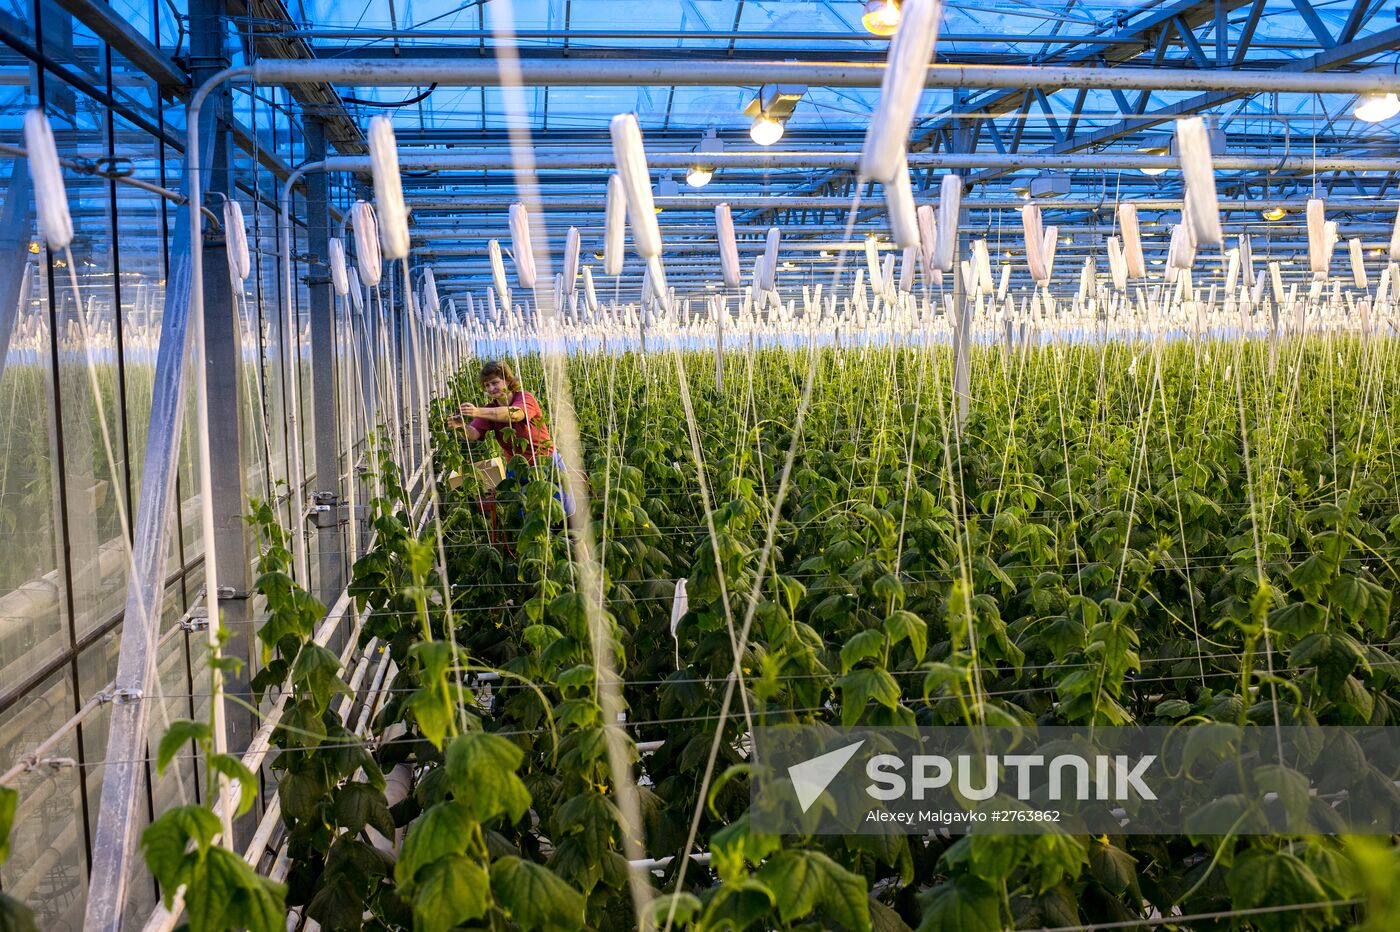 The Druzhino agricultural center in the Omsk Region